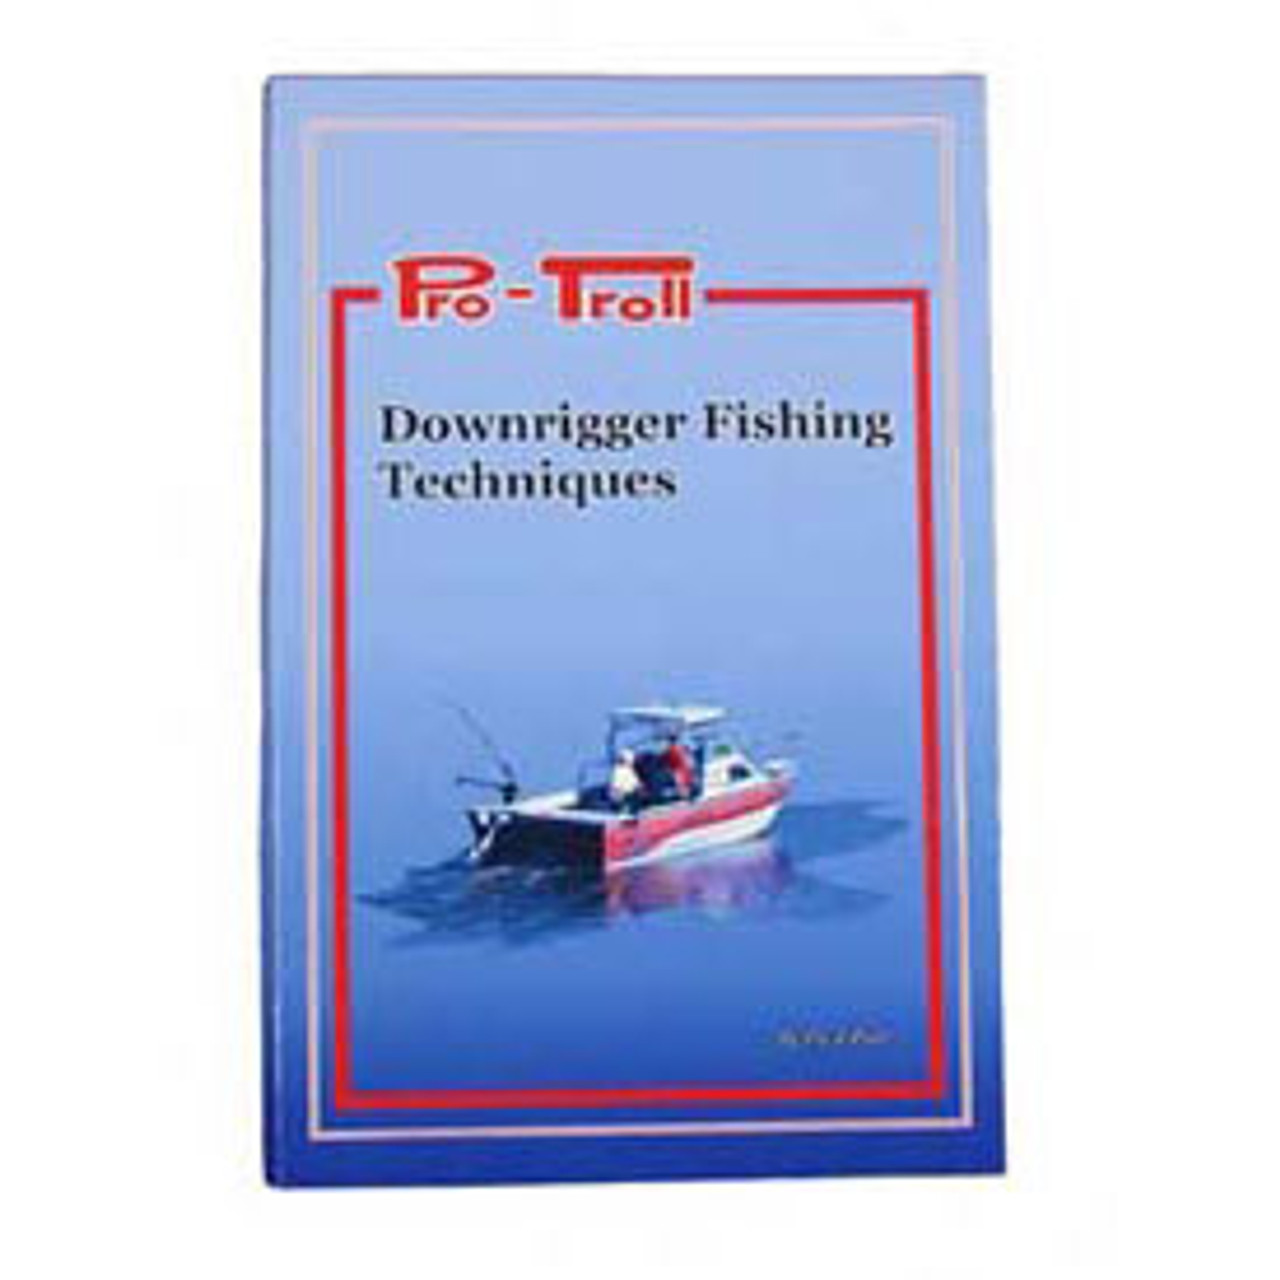 Pro-Troll Fishing Products Downrigger Fishing Techniques Book